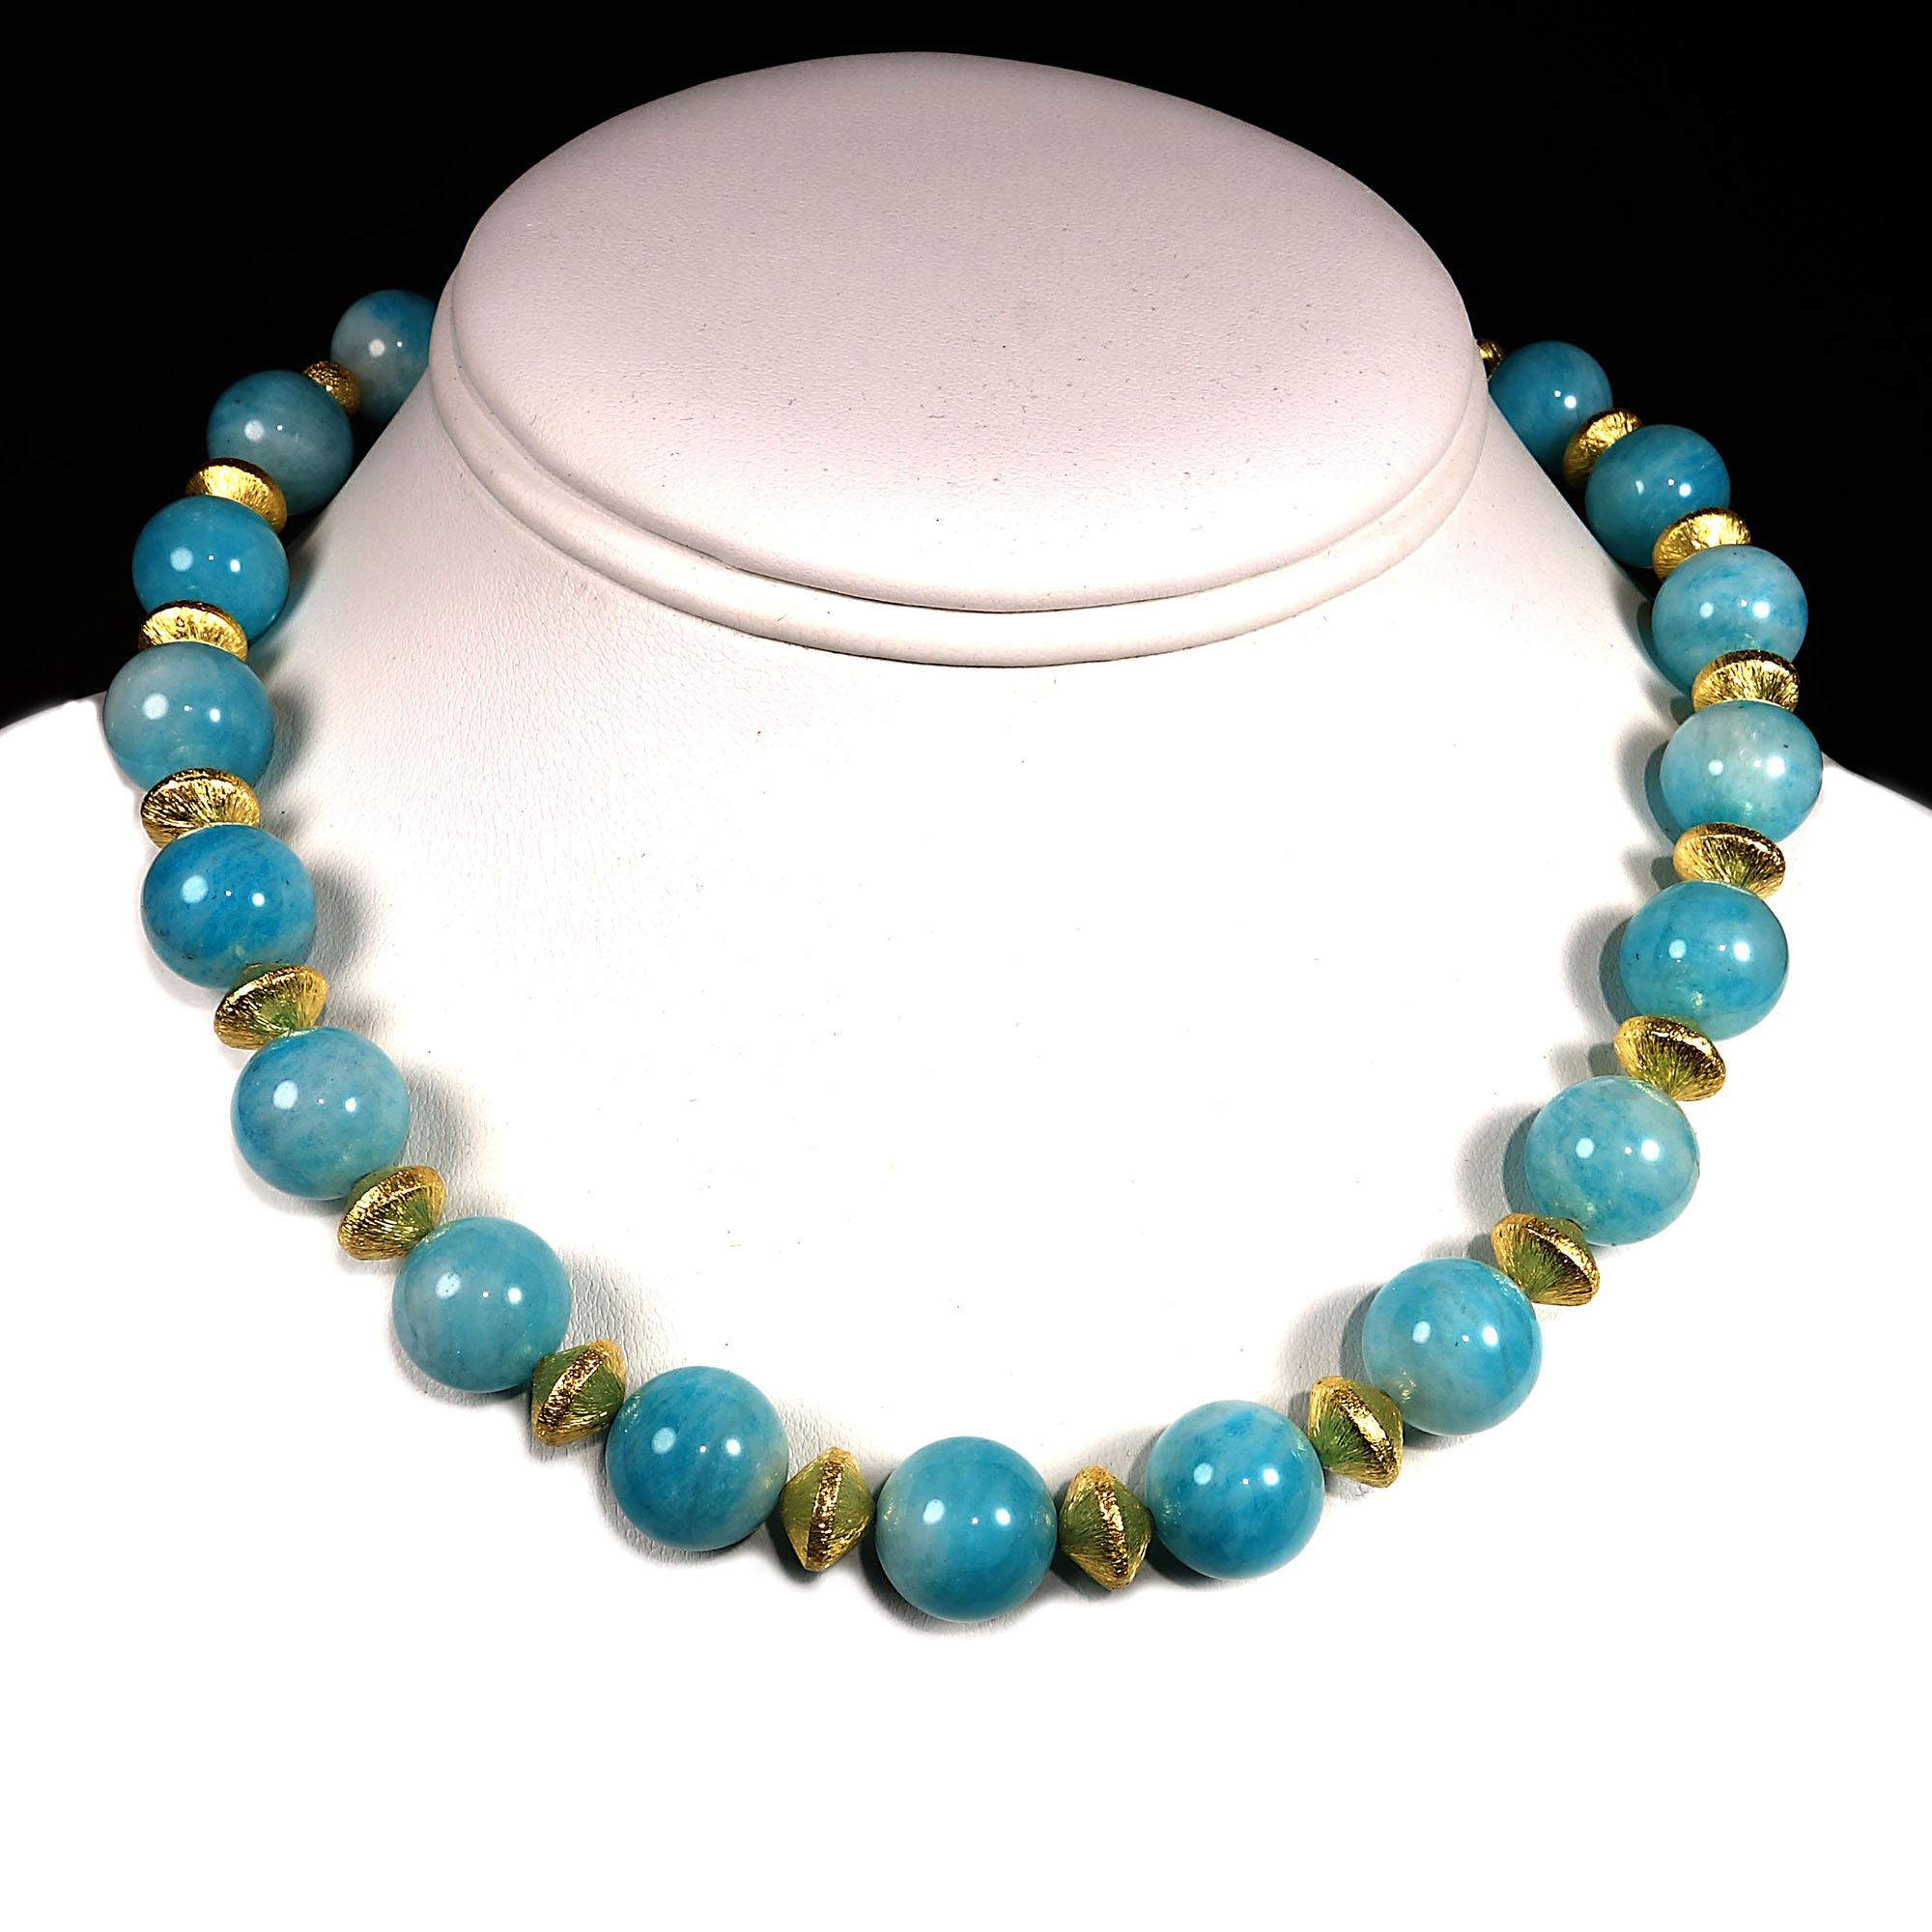 Gemjunky Choker Necklace of Glowing Amazonite with Gold Tone Accents 1